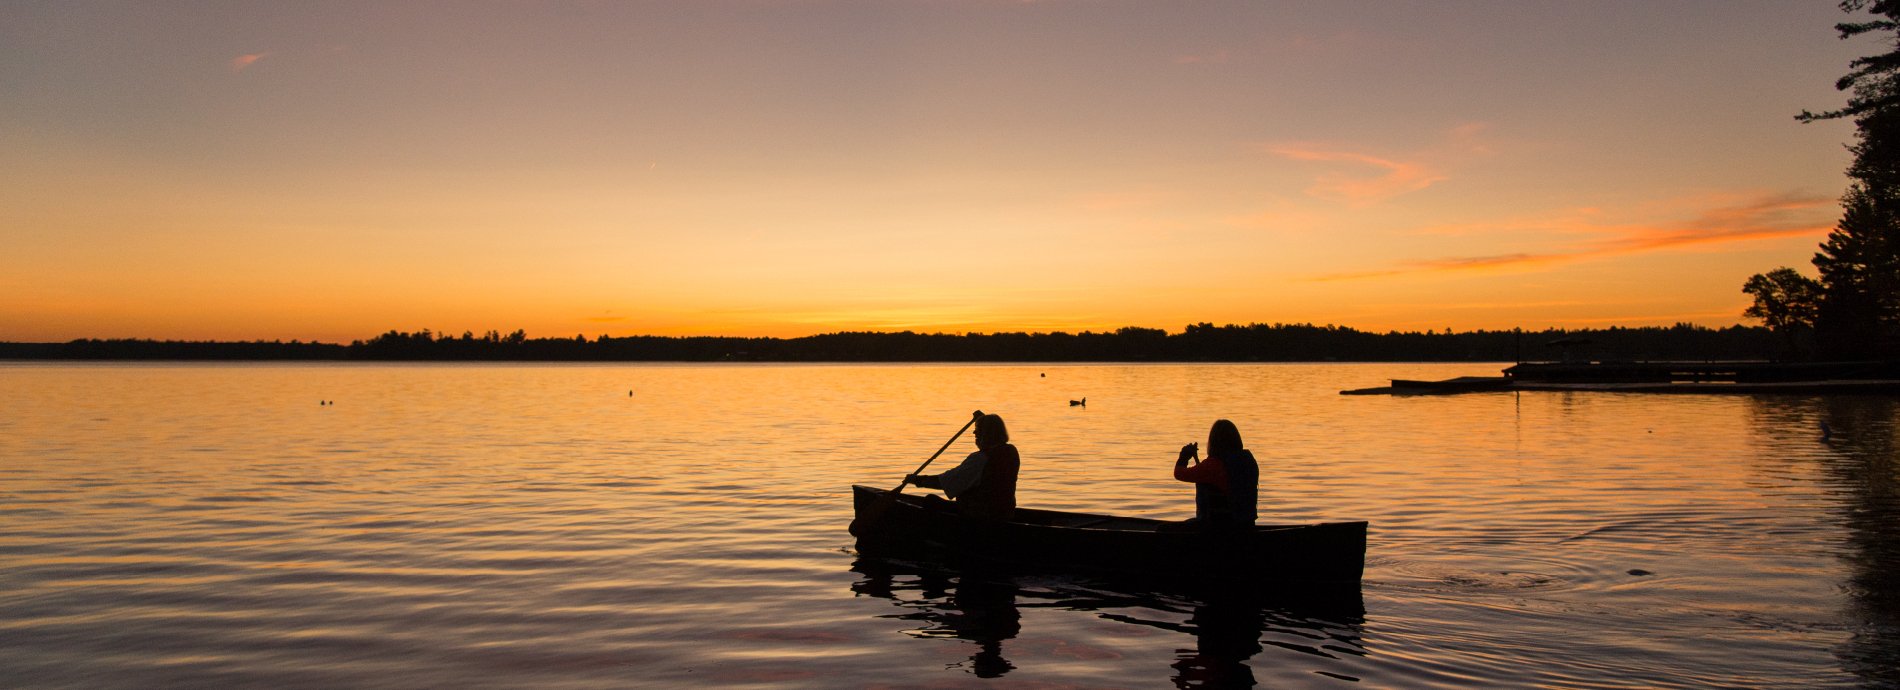 two people in canoe on a lake before dusk